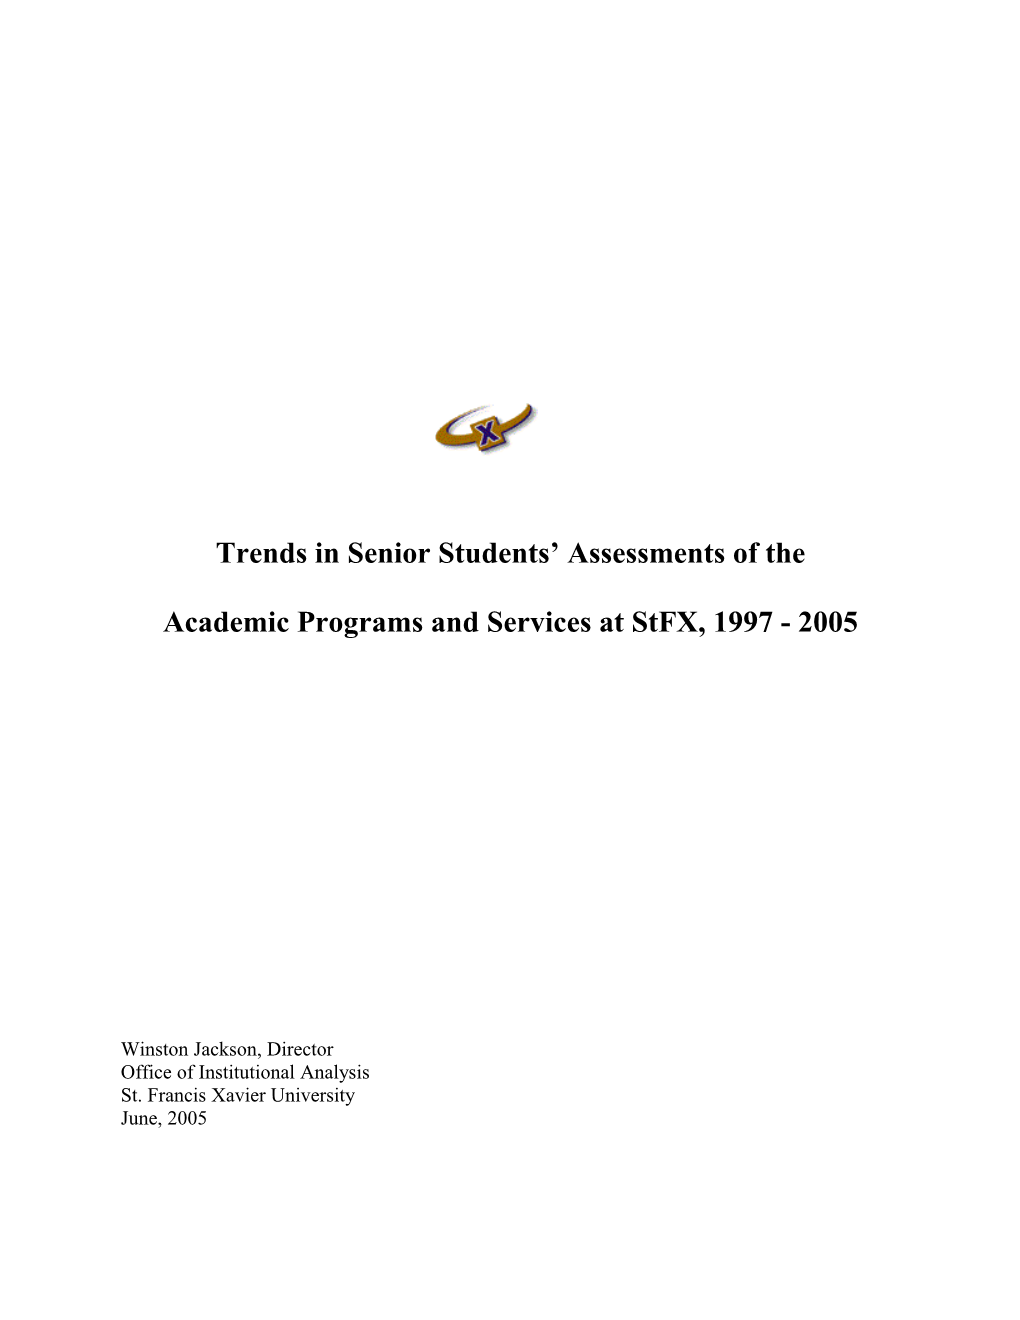 Recent Trends in Student Responses to Academic Programs and Food Services at Stfx